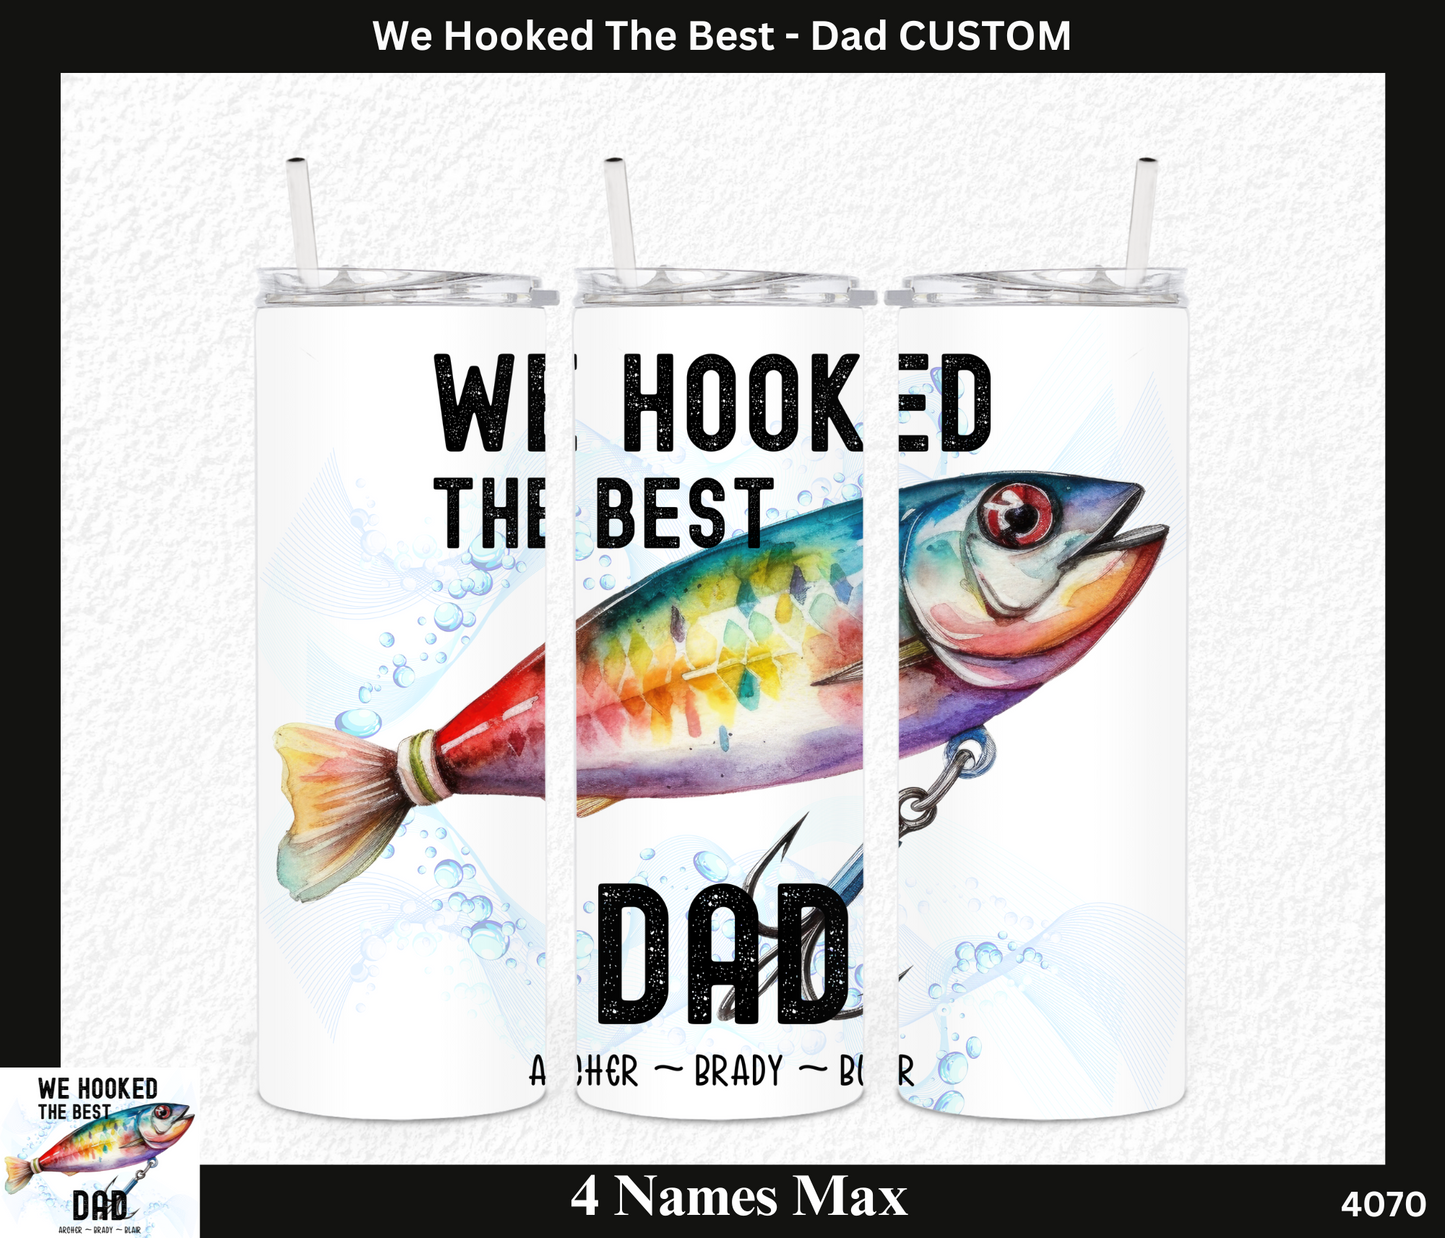 We Hookedn The The Best - Dad CUSTOM